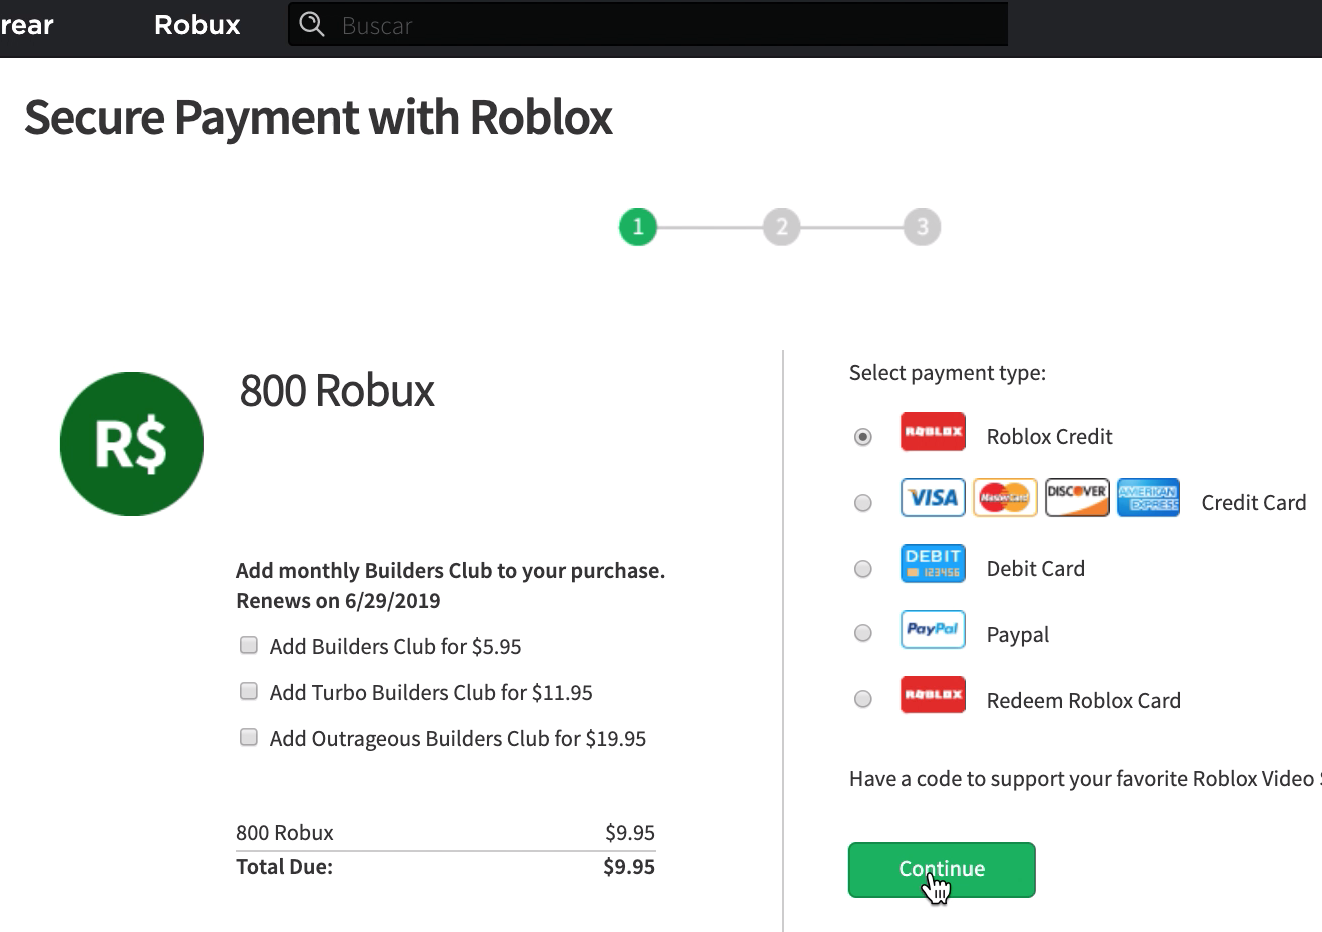 Pin Roblox Card How To Get Free Robux Codes 2019 February - random number generator roblox codes free robux 2019 no joke